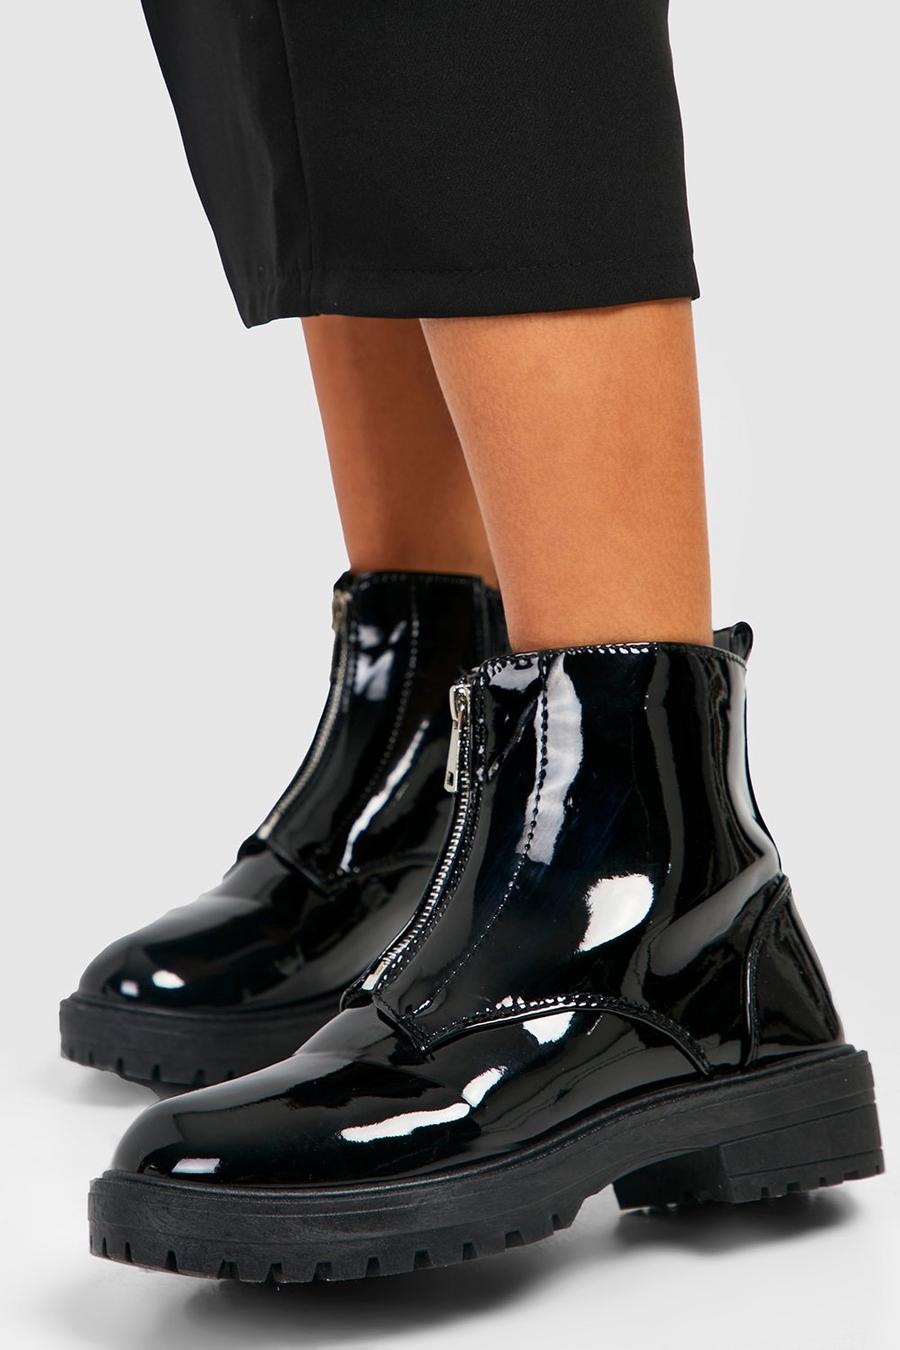 Black Zip Front Patent Flat Ankle Boots image number 1